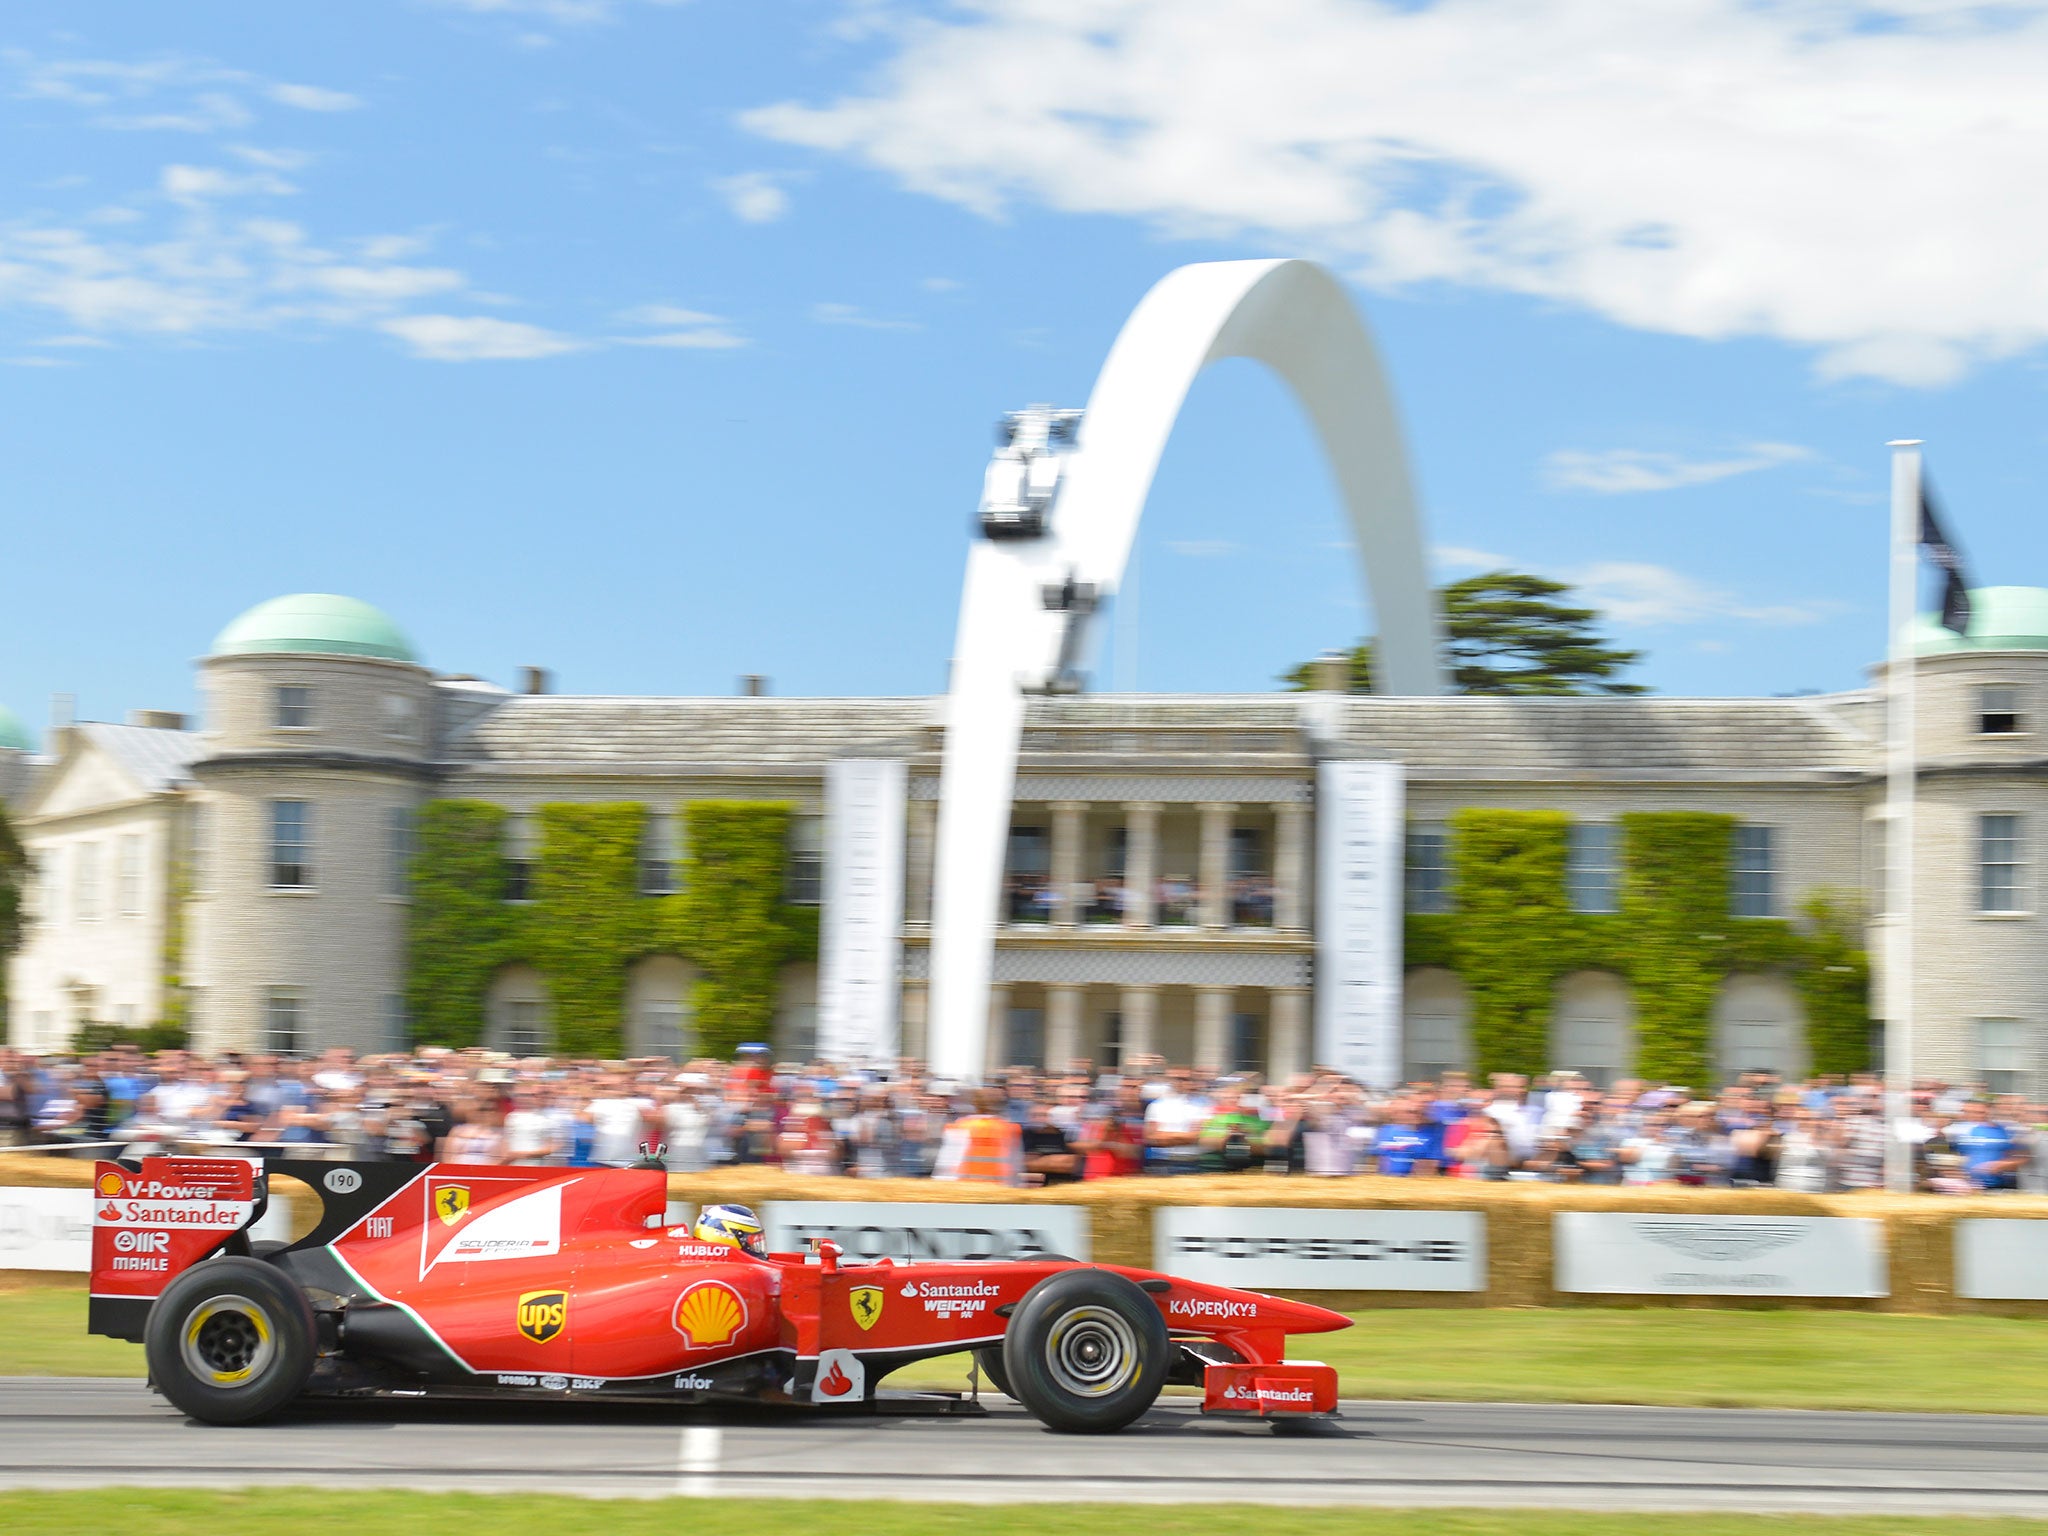 The track passes the front of Goodwood House